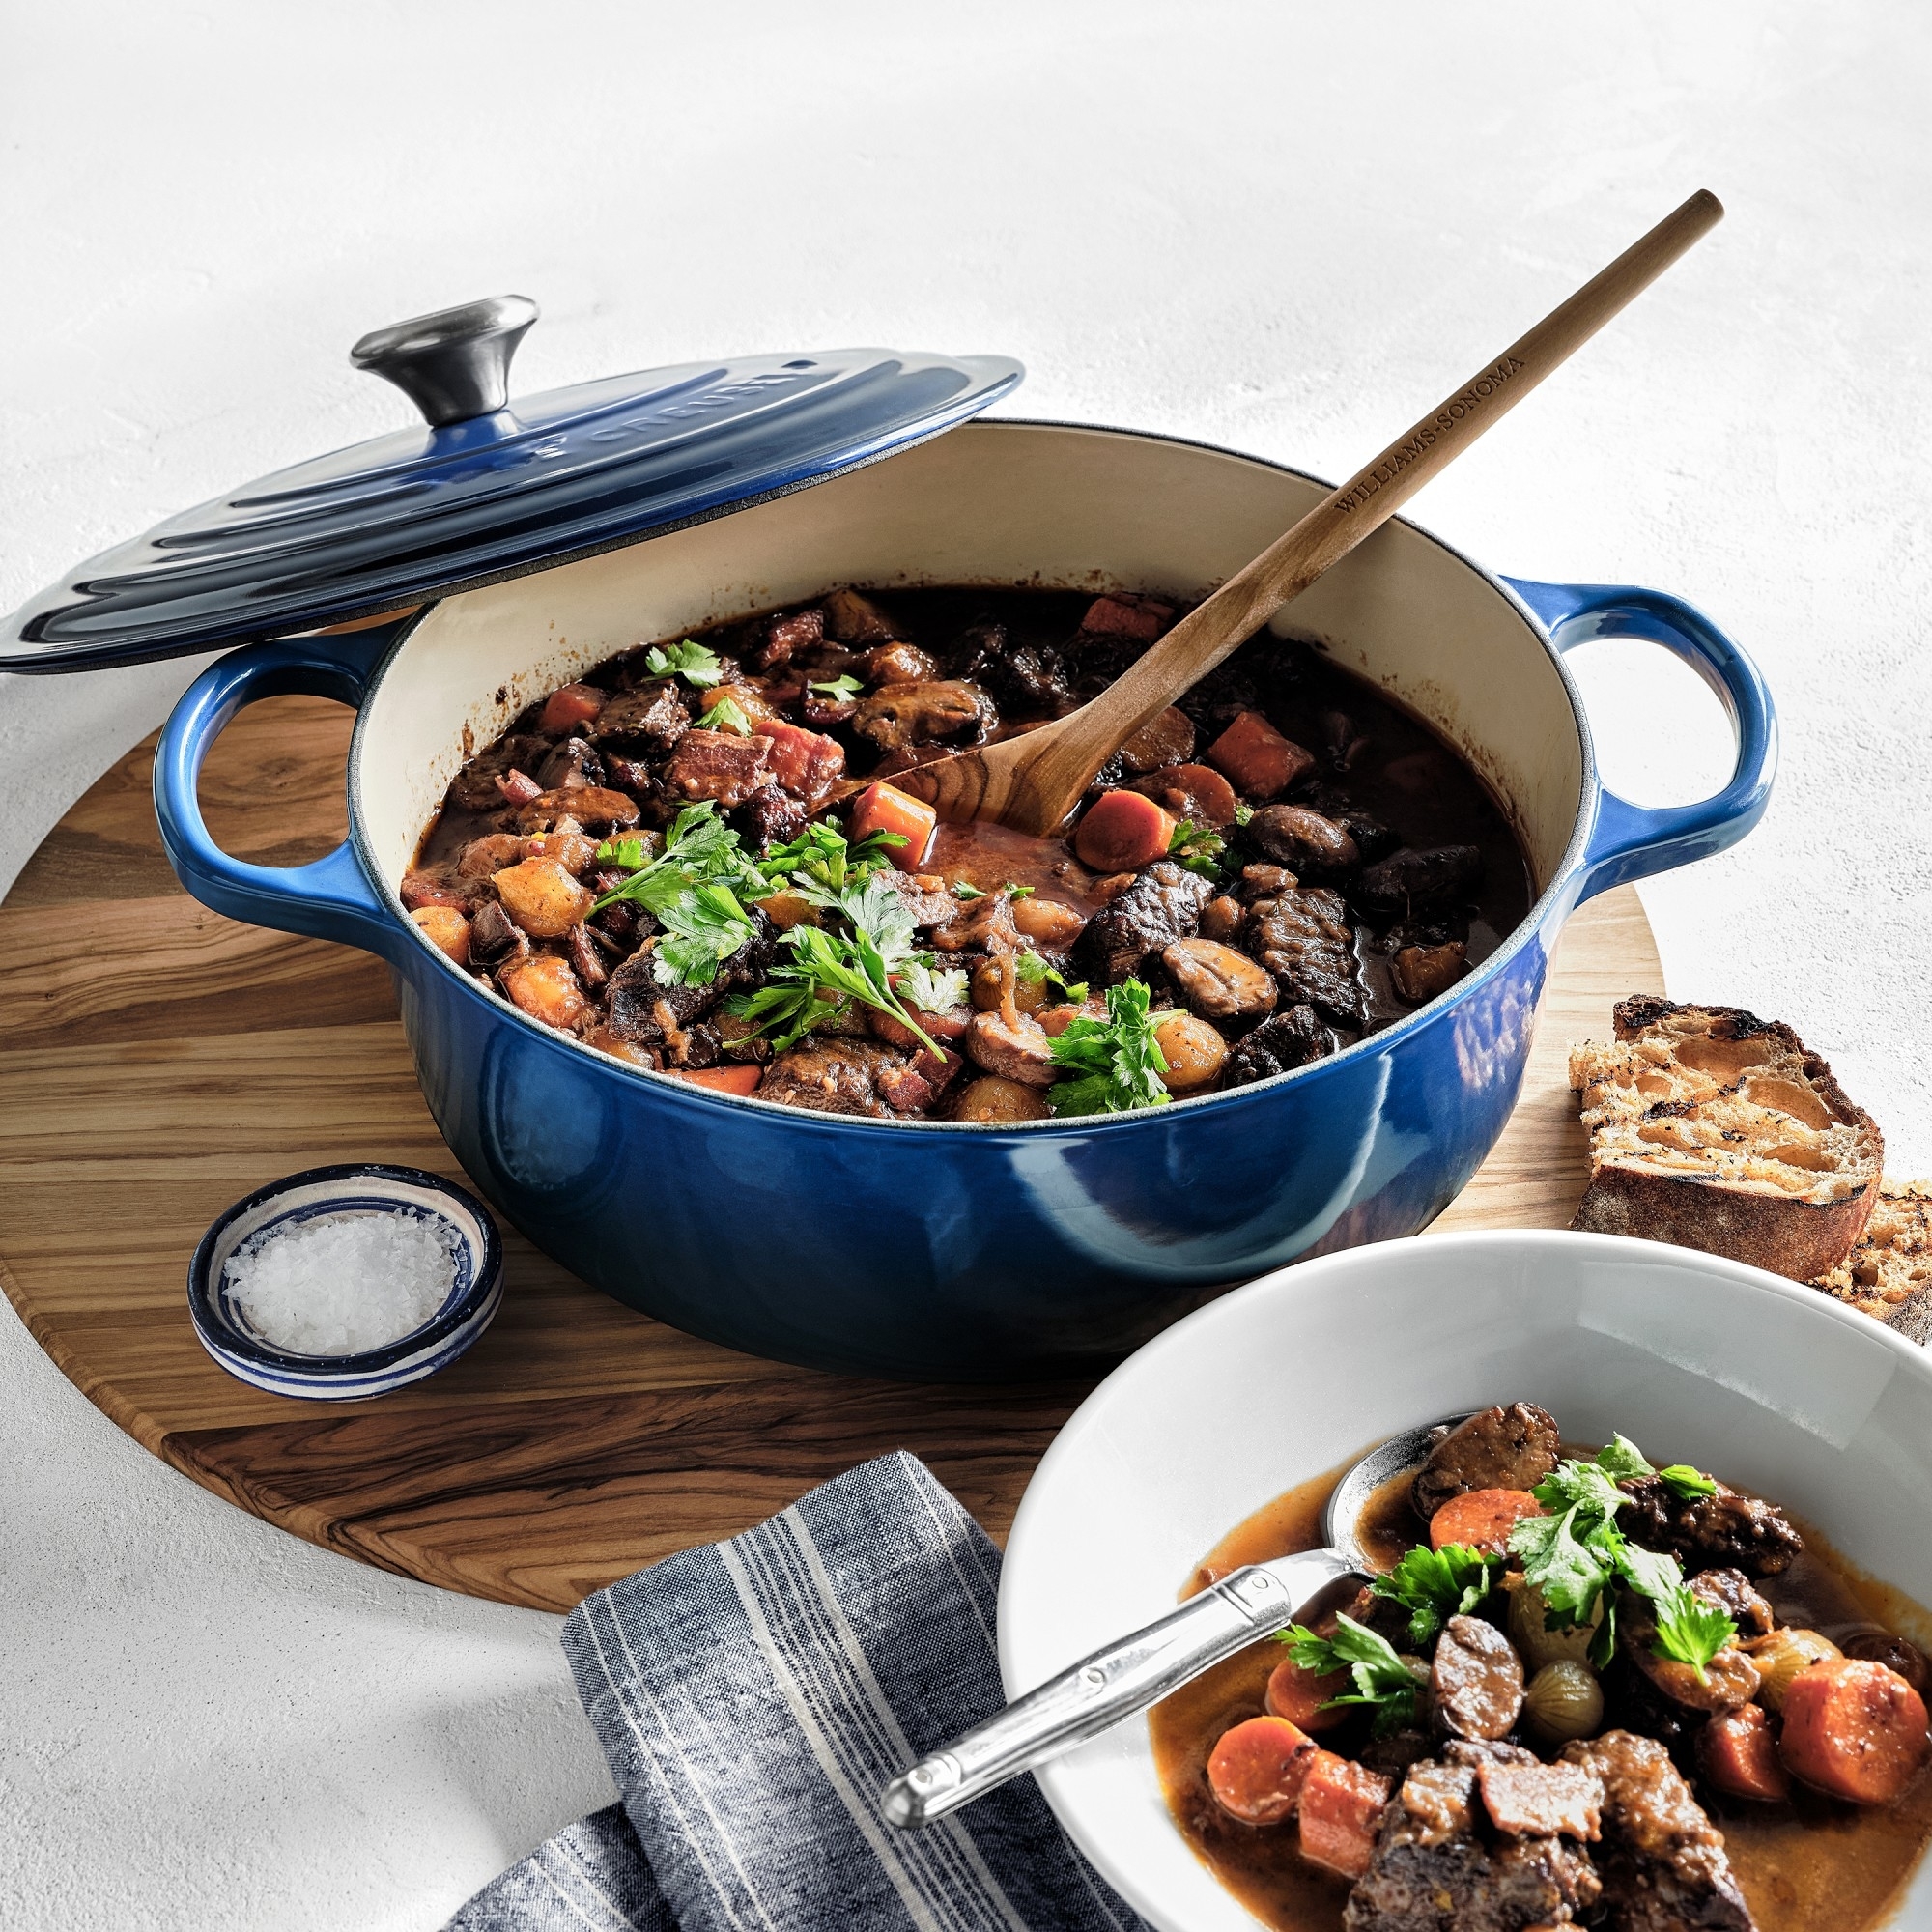 A blue Dutch oven filled with hearty beef stew sits on a wooden board, with a serving spoon inside. A bowl of stew and a striped napkin are next to it